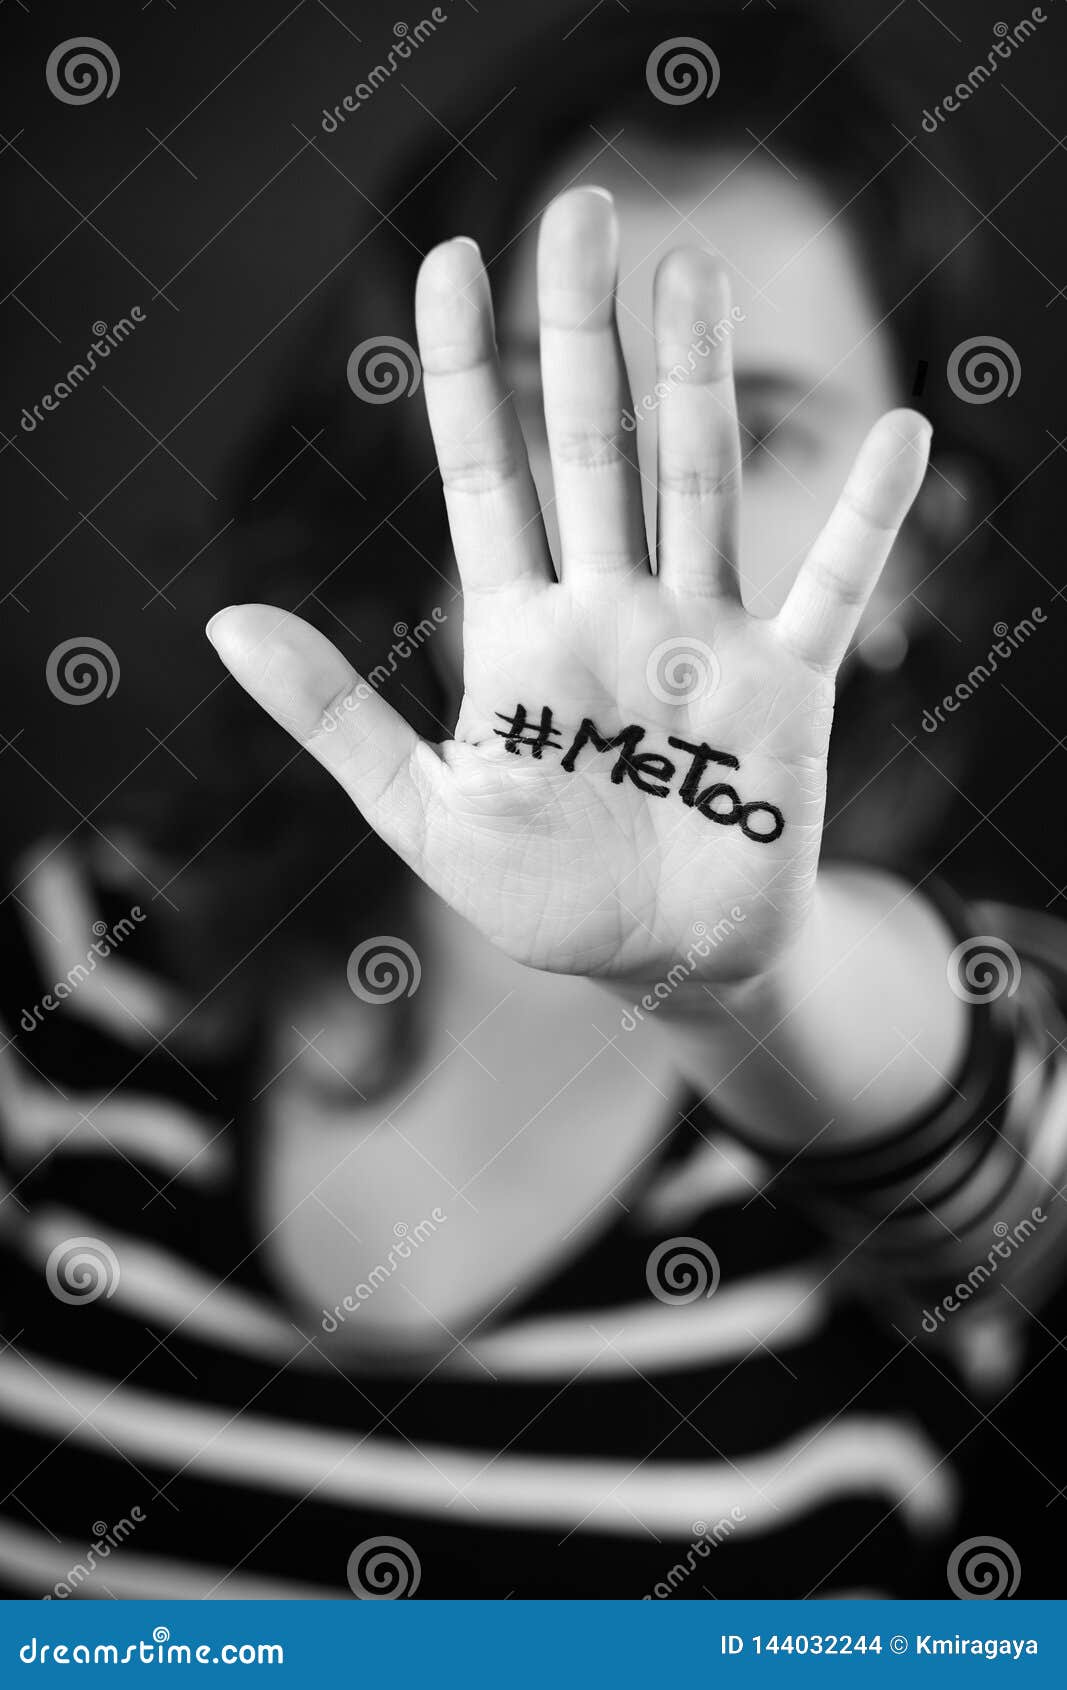 young woman with the hashtag metoo written on her hand